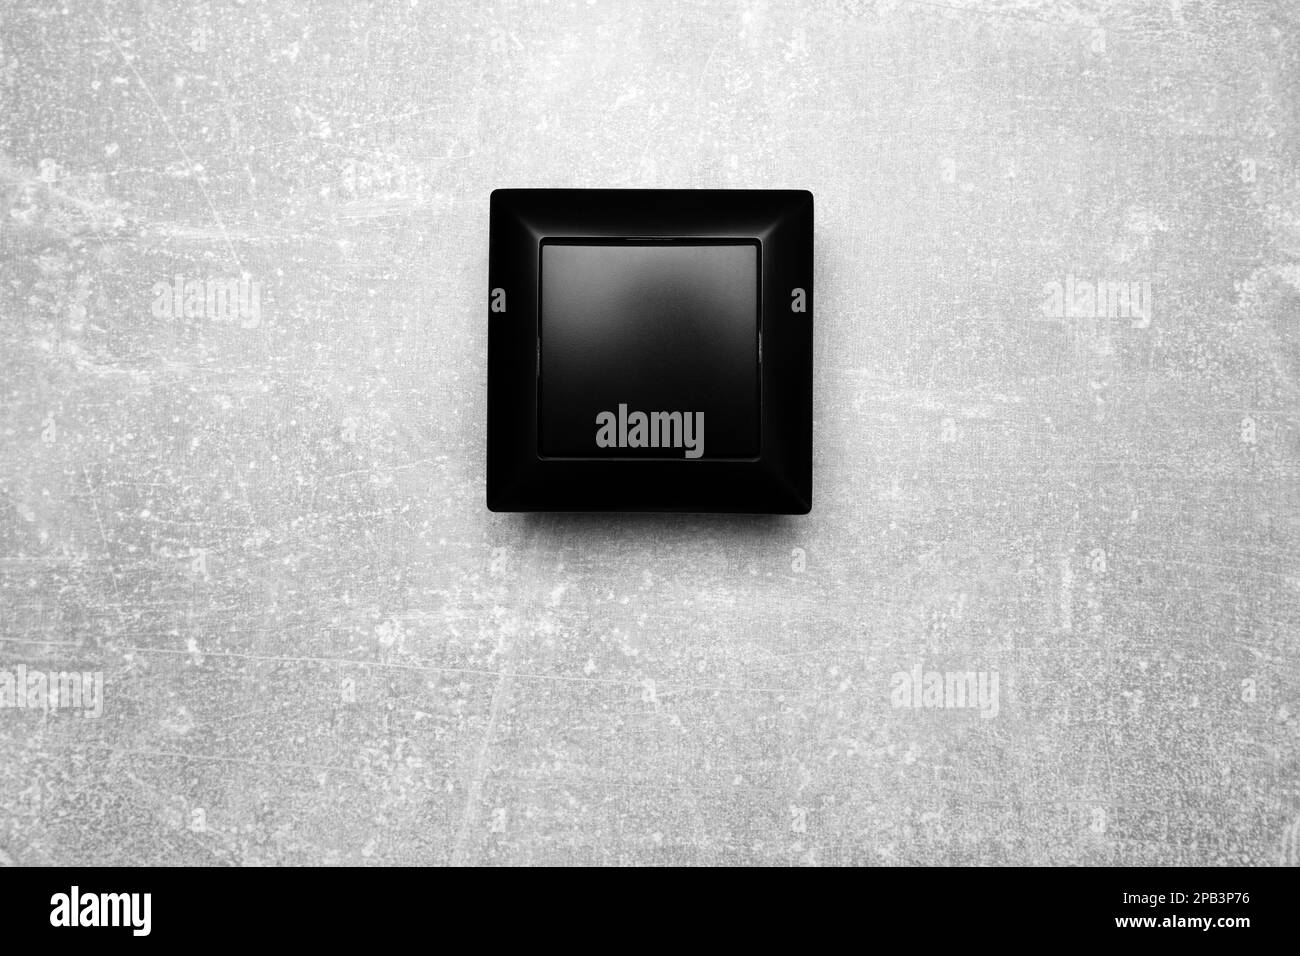 Black light switch on grey background, top view Stock Photo